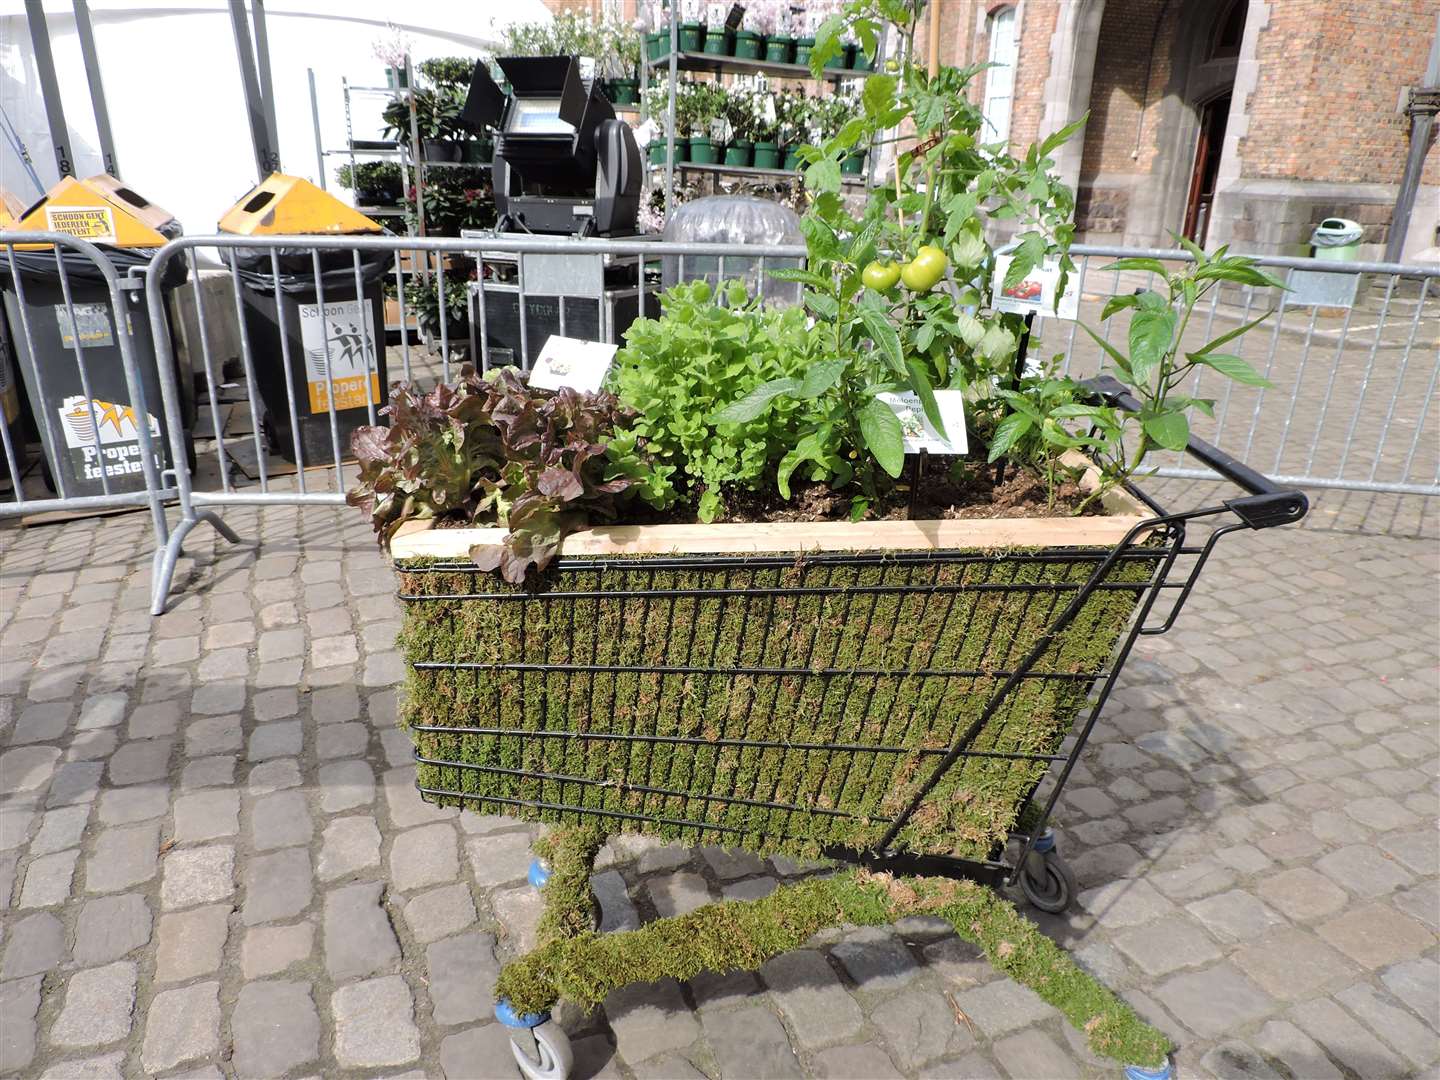 A shopping trolley complete with fresh vegetables